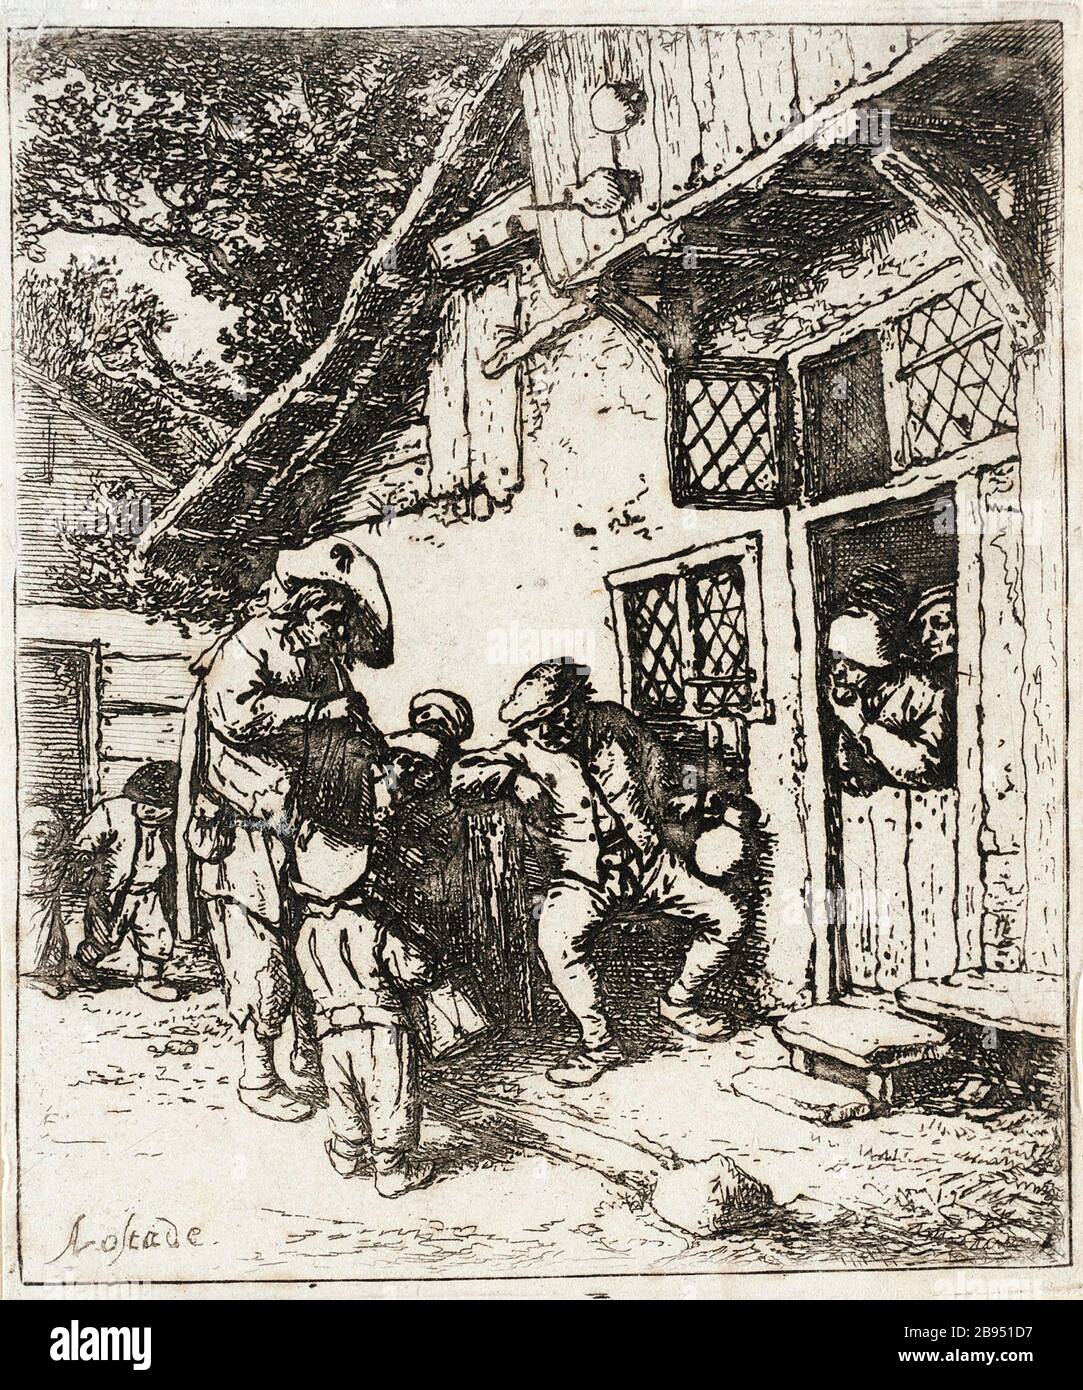 'The Wandering Musicians; English:  Holland, 1642 (?) Alternate Title: Le Jouer de flute et sa petit tambour Prints; etchings Etching Gift of Mrs. Mary B. Regan (31.21.106) Prints and Drawings; 1642 (?); ' Stock Photo